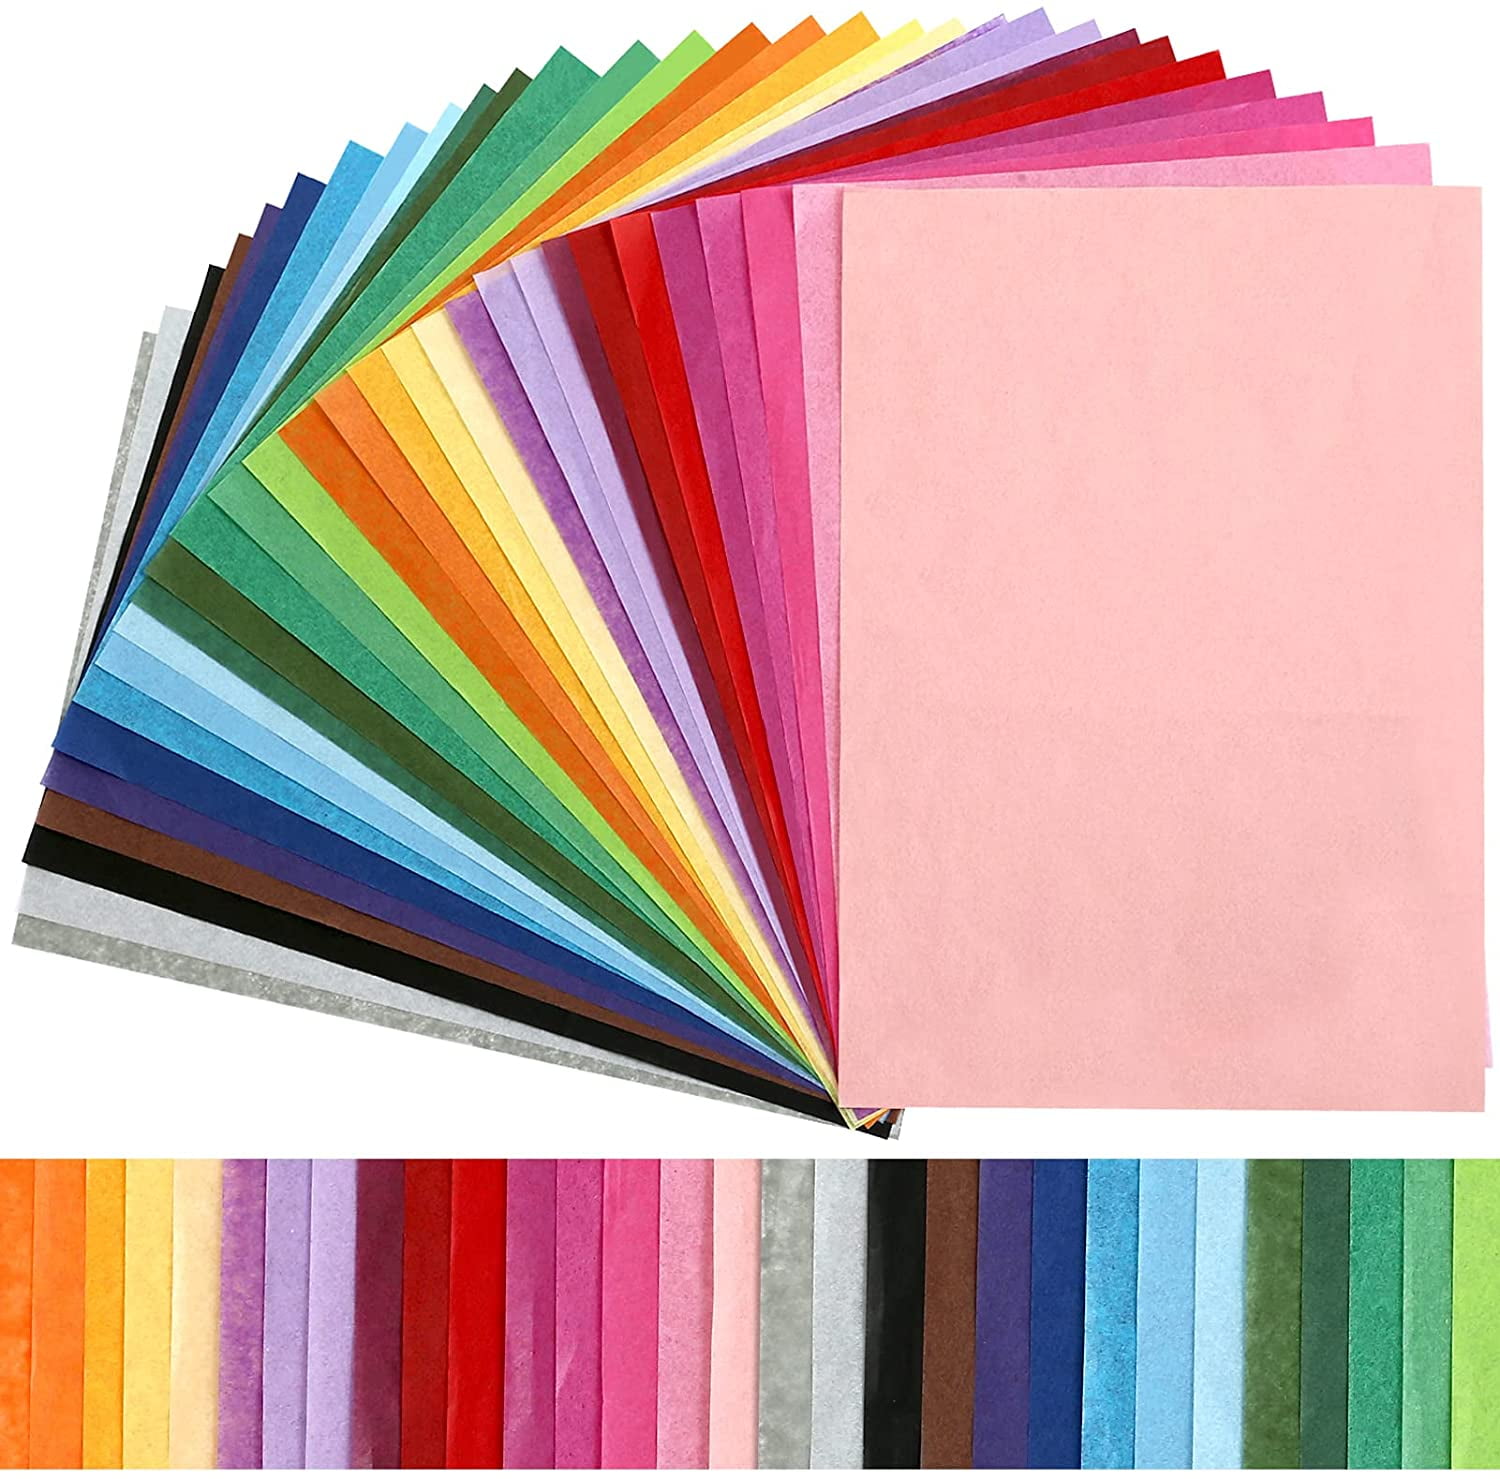 Buy 2 get 1 free Tissue Paper Sheets 10 sheets NO SILVER LEFT Free Post 